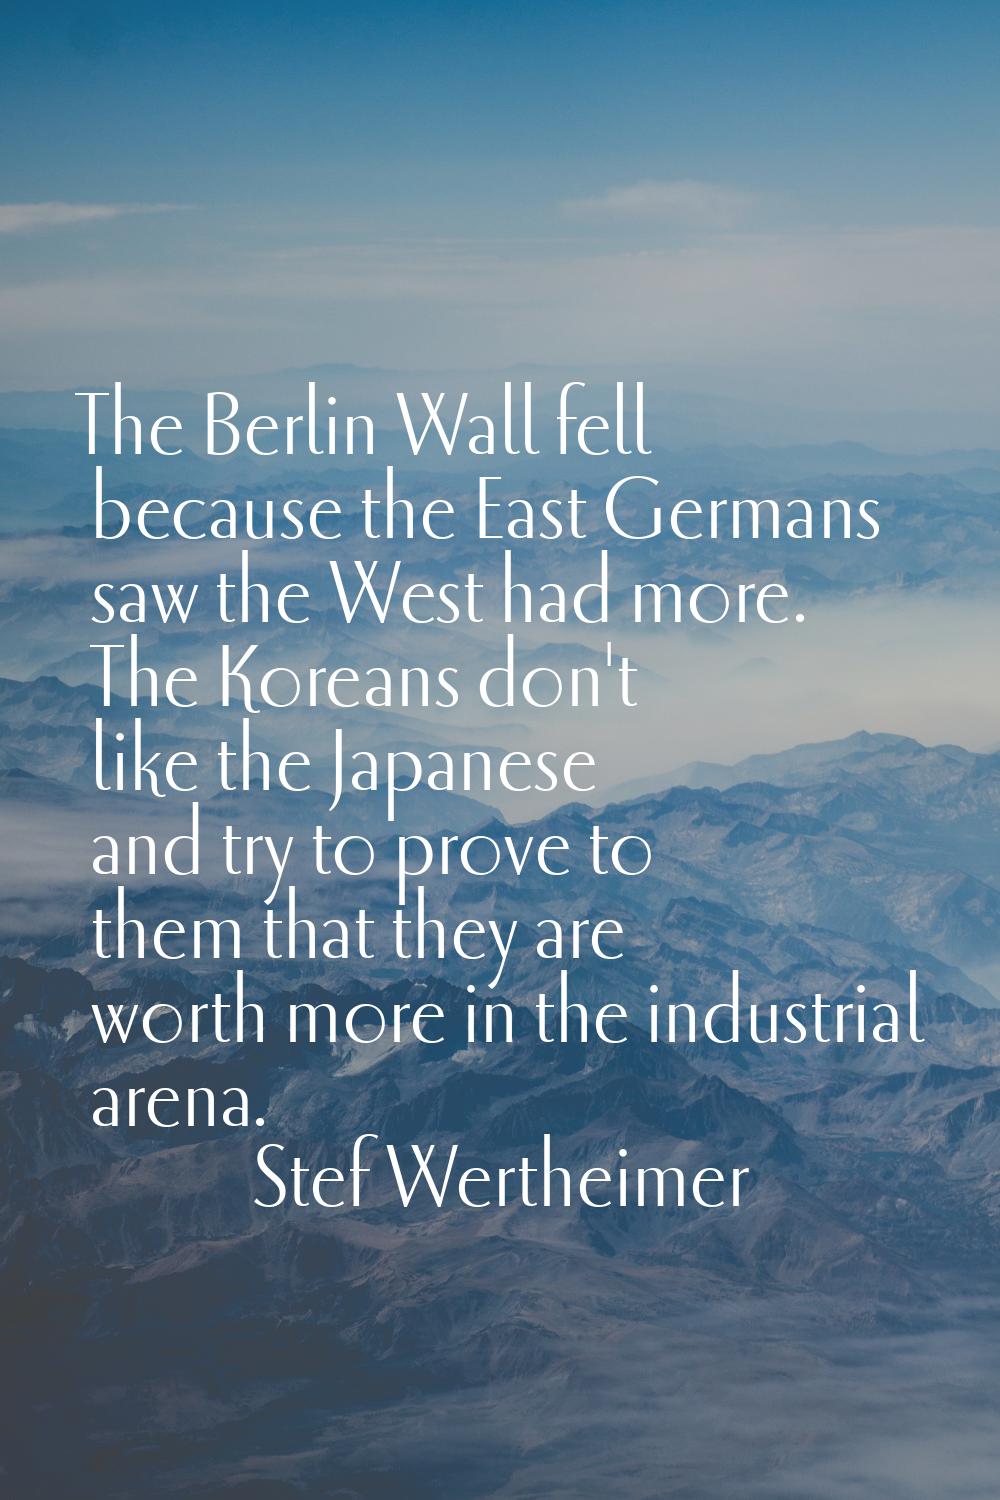 The Berlin Wall fell because the East Germans saw the West had more. The Koreans don't like the Jap